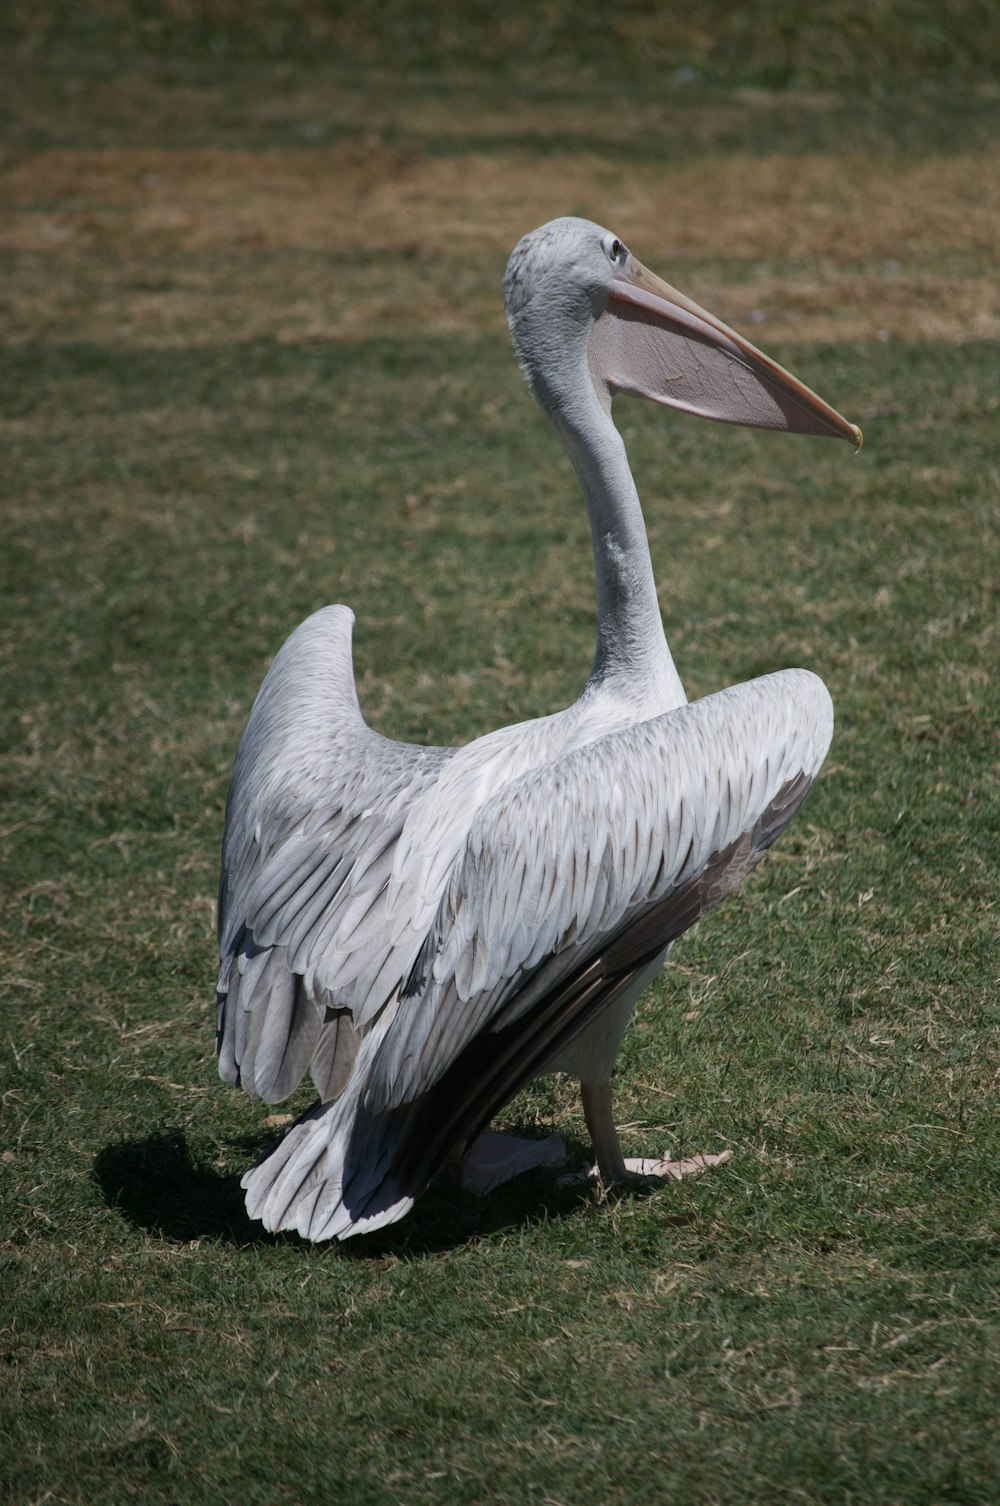 white pelican on green grass field during daytime